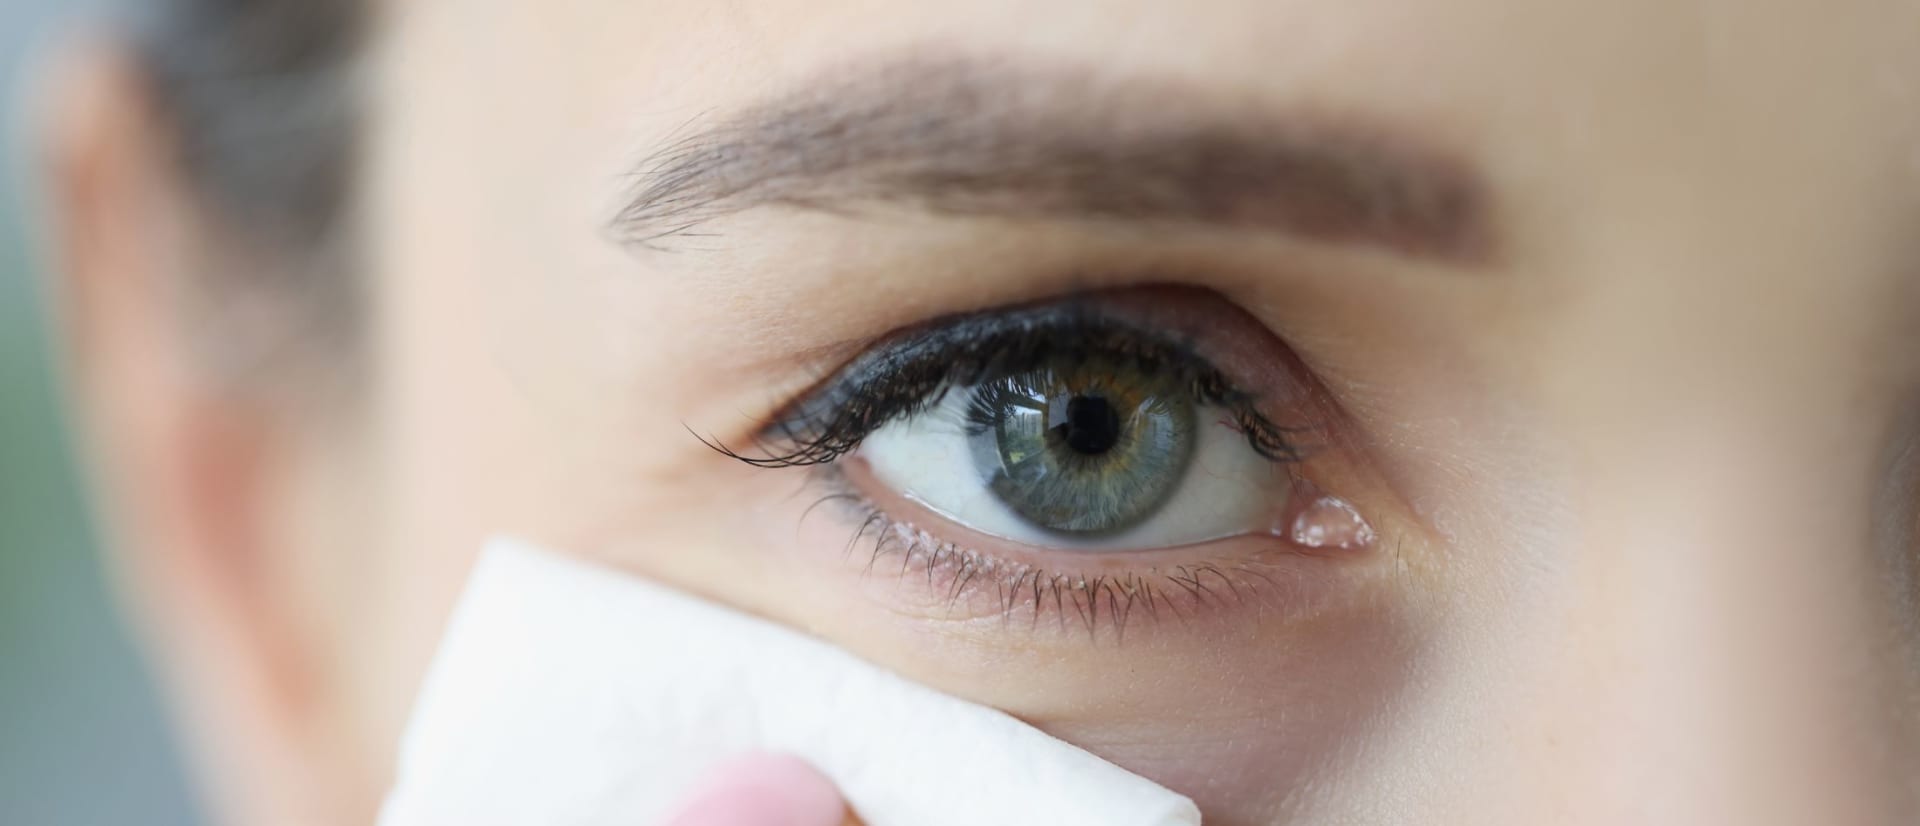 What is conjunctivitis?